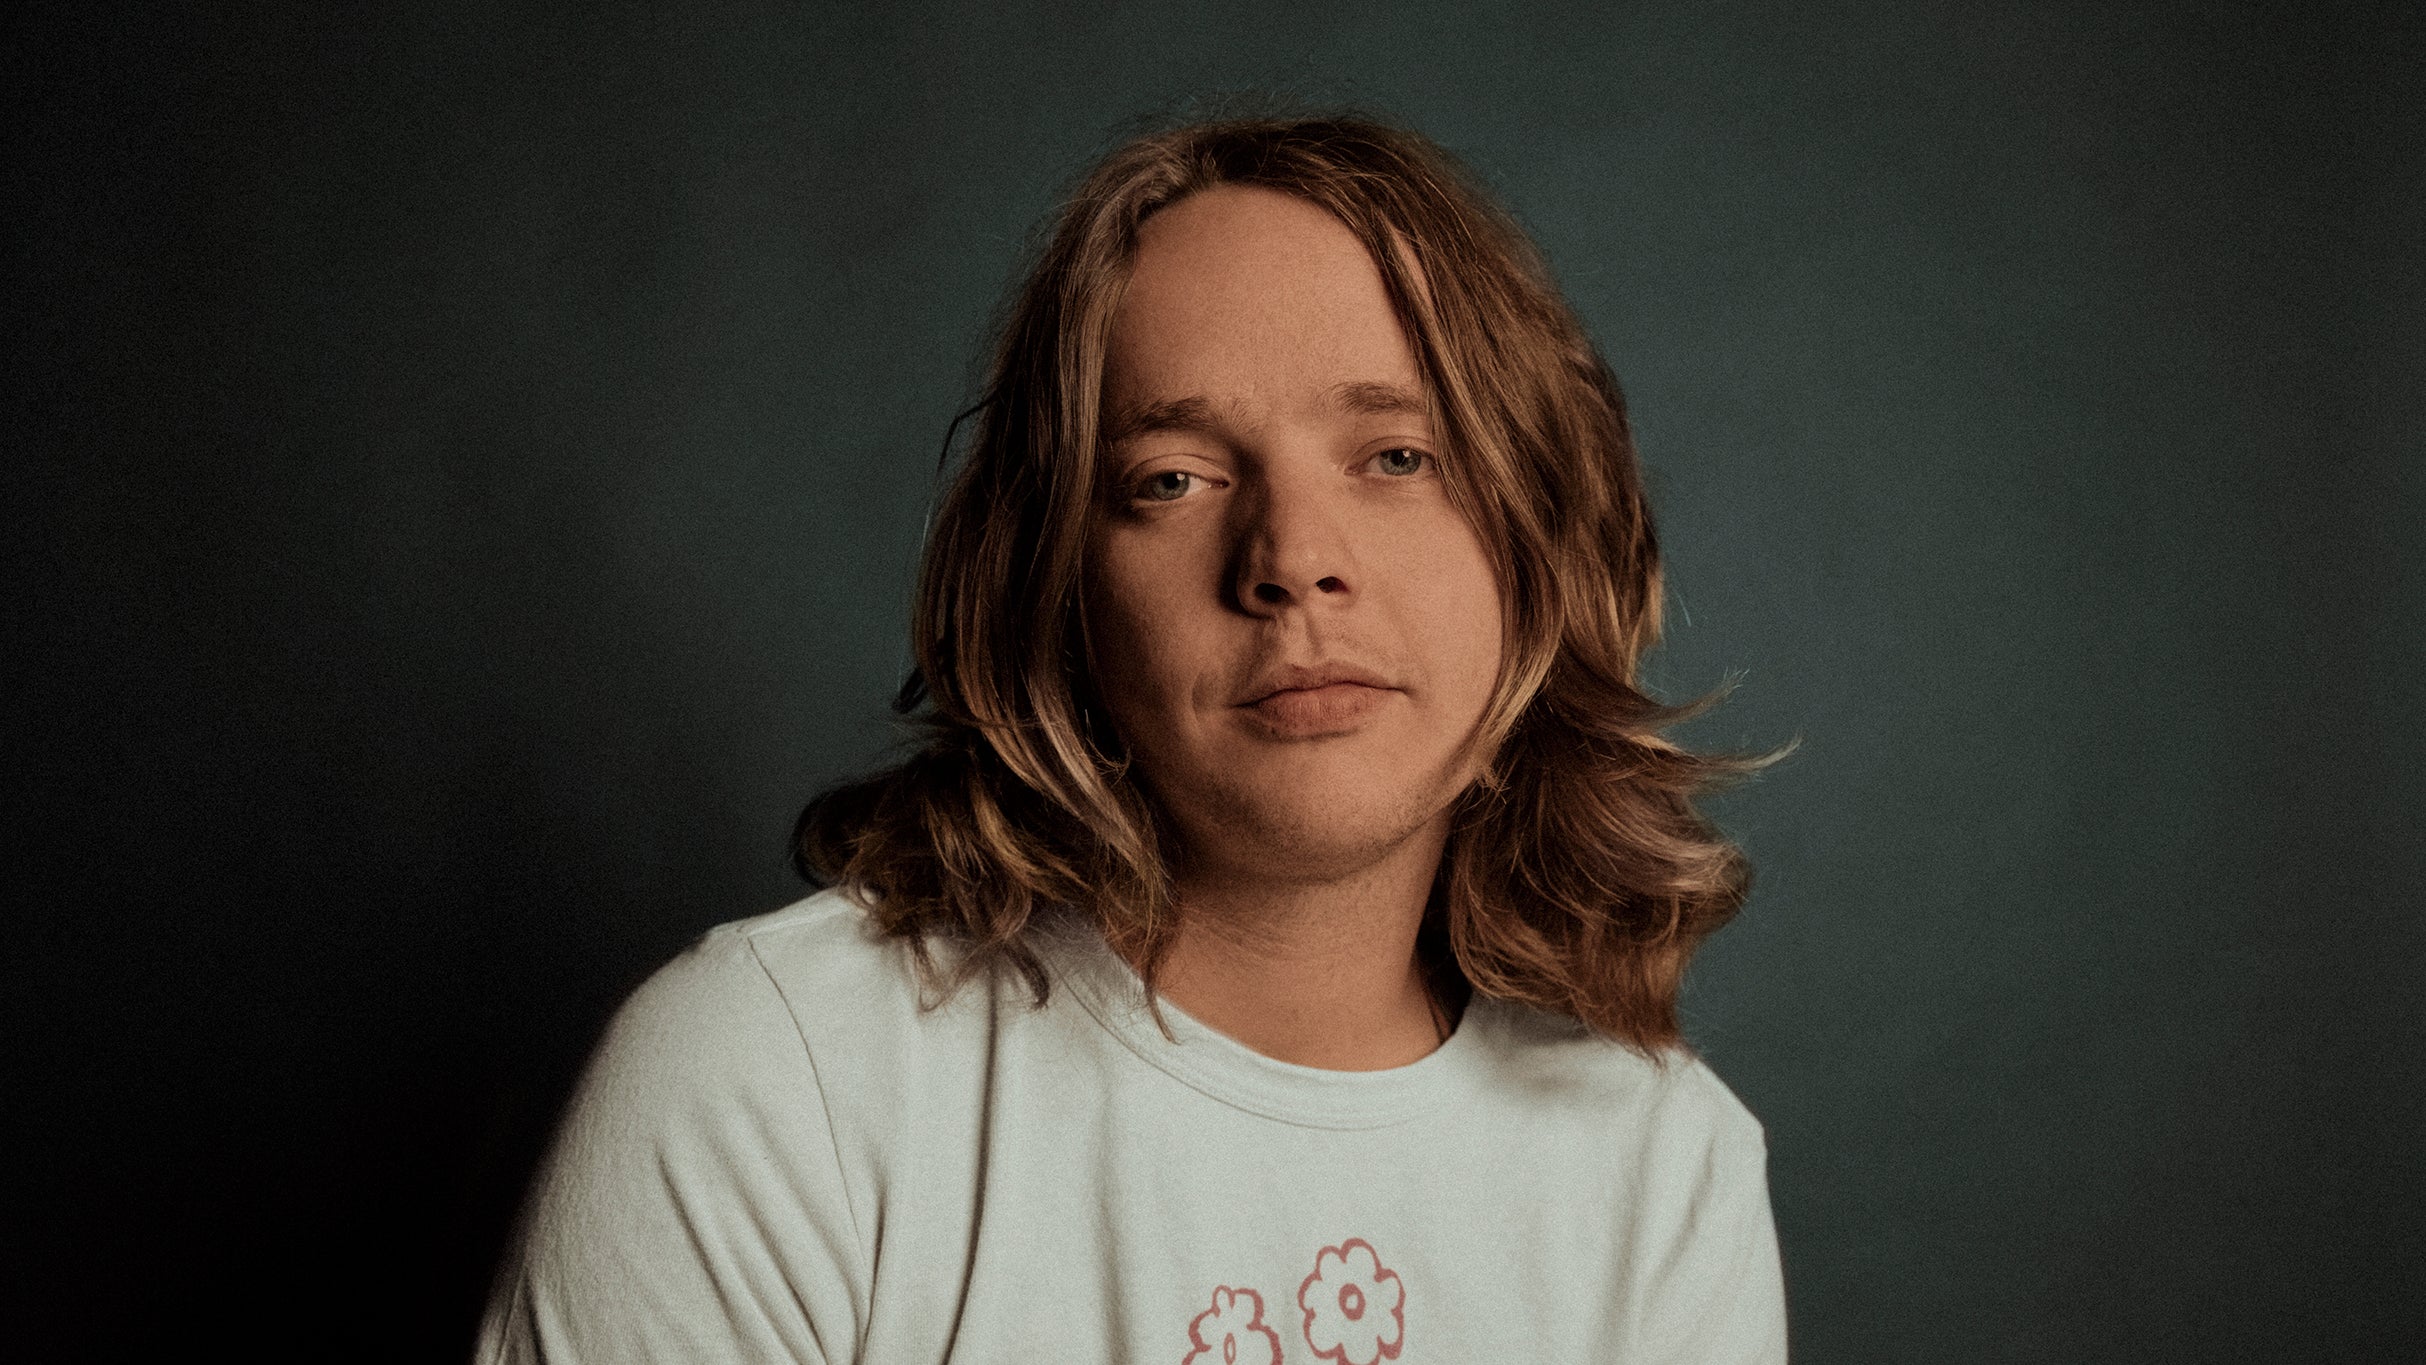 Billy Strings pre-sale password for approved tickets in Los Angeles